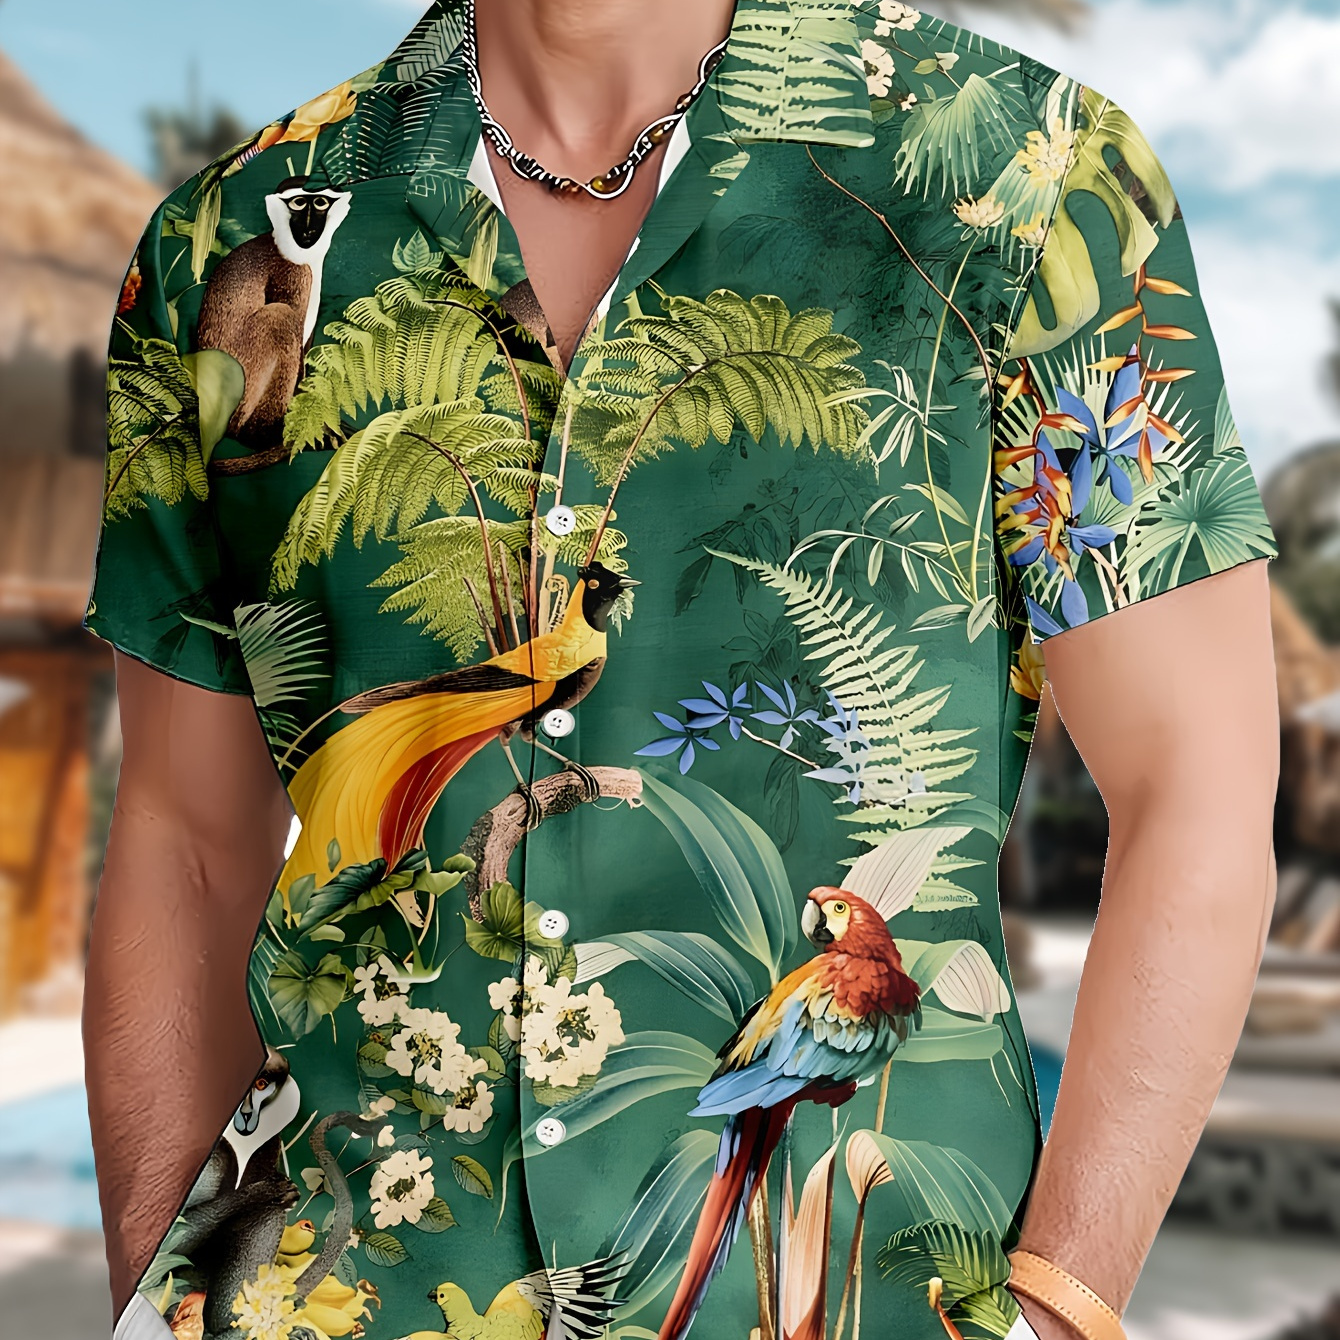 

Men's Trendy Hawaiian Lapel Collar Graphic Shirt With Stylish Print For Summer Beach, Pool And Resort, Comfort Fit